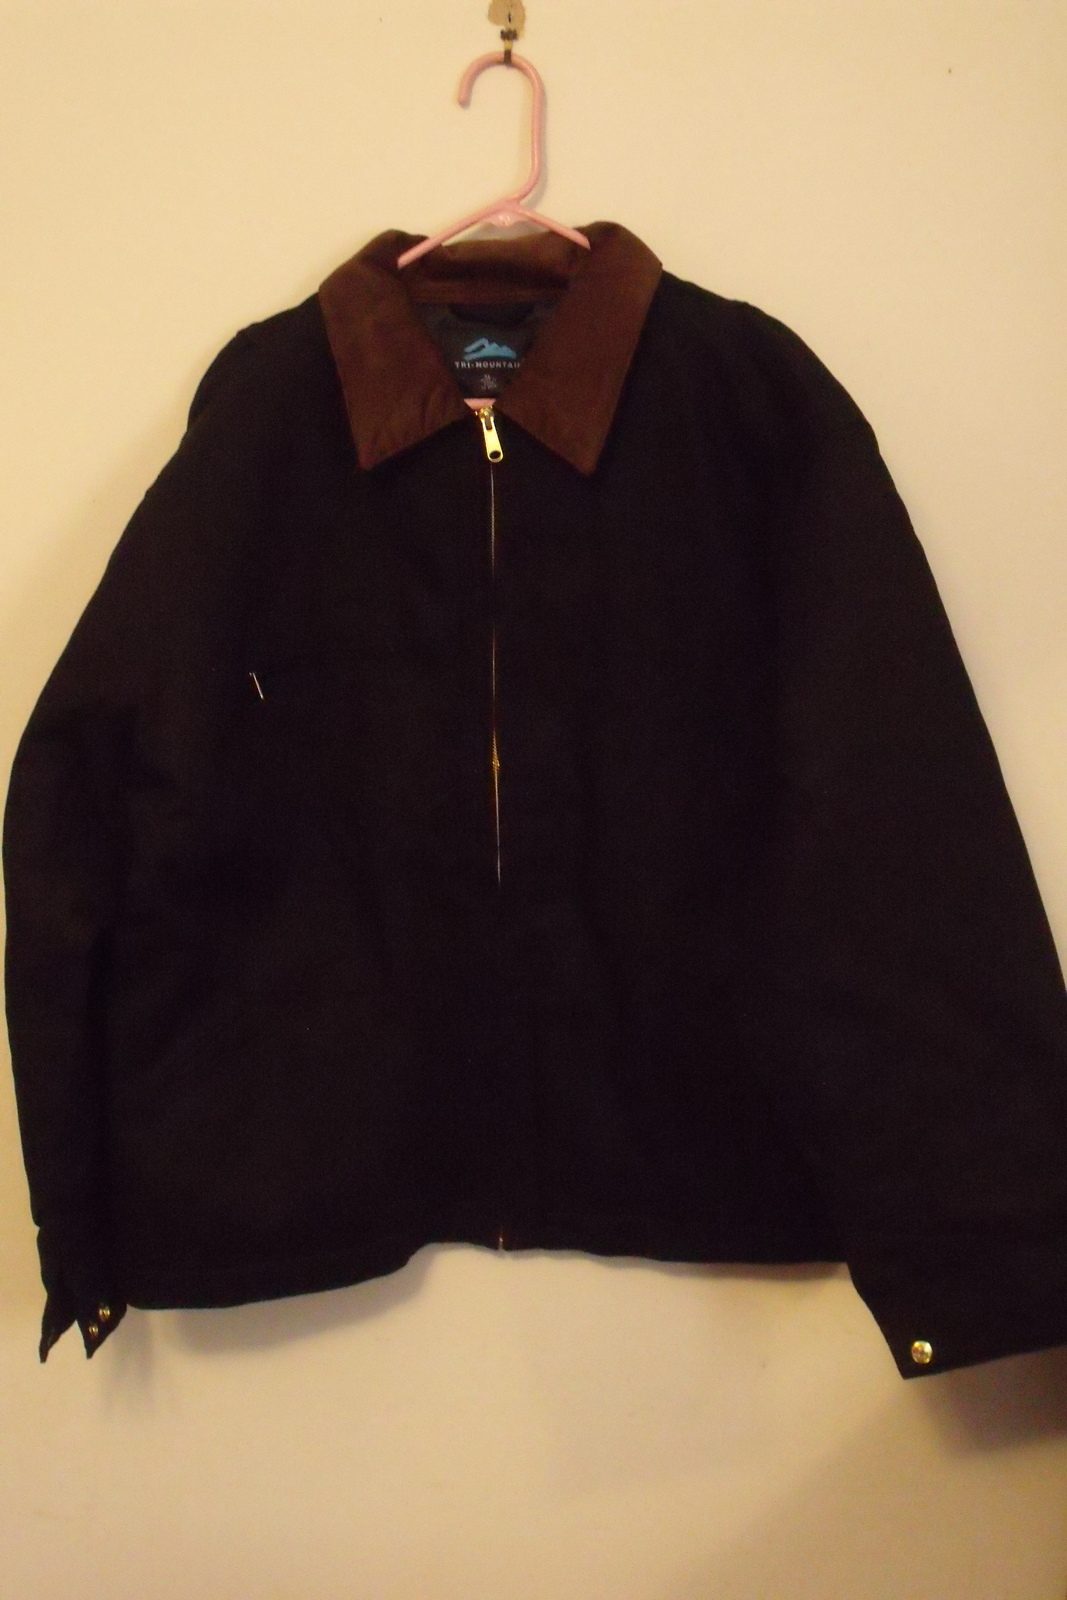 Primary image for Mens Tri Mountain NWT Black Cotton Canvas Work Jacket Full Zip Size 5XL